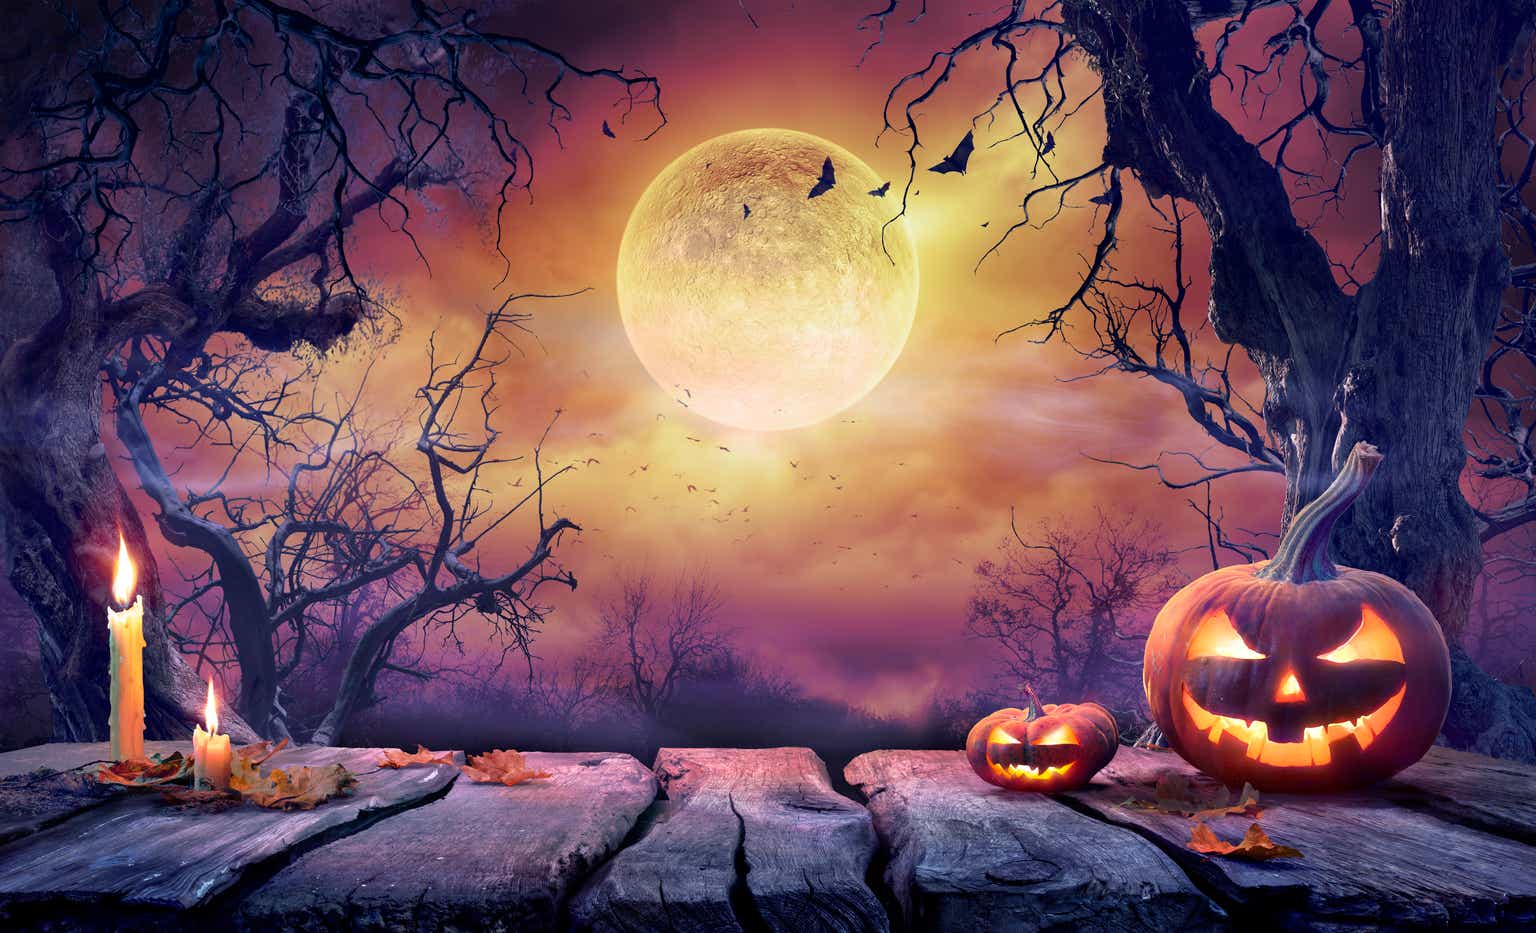 Counter-strike: Global Offensive gets suitably spooky Halloween update